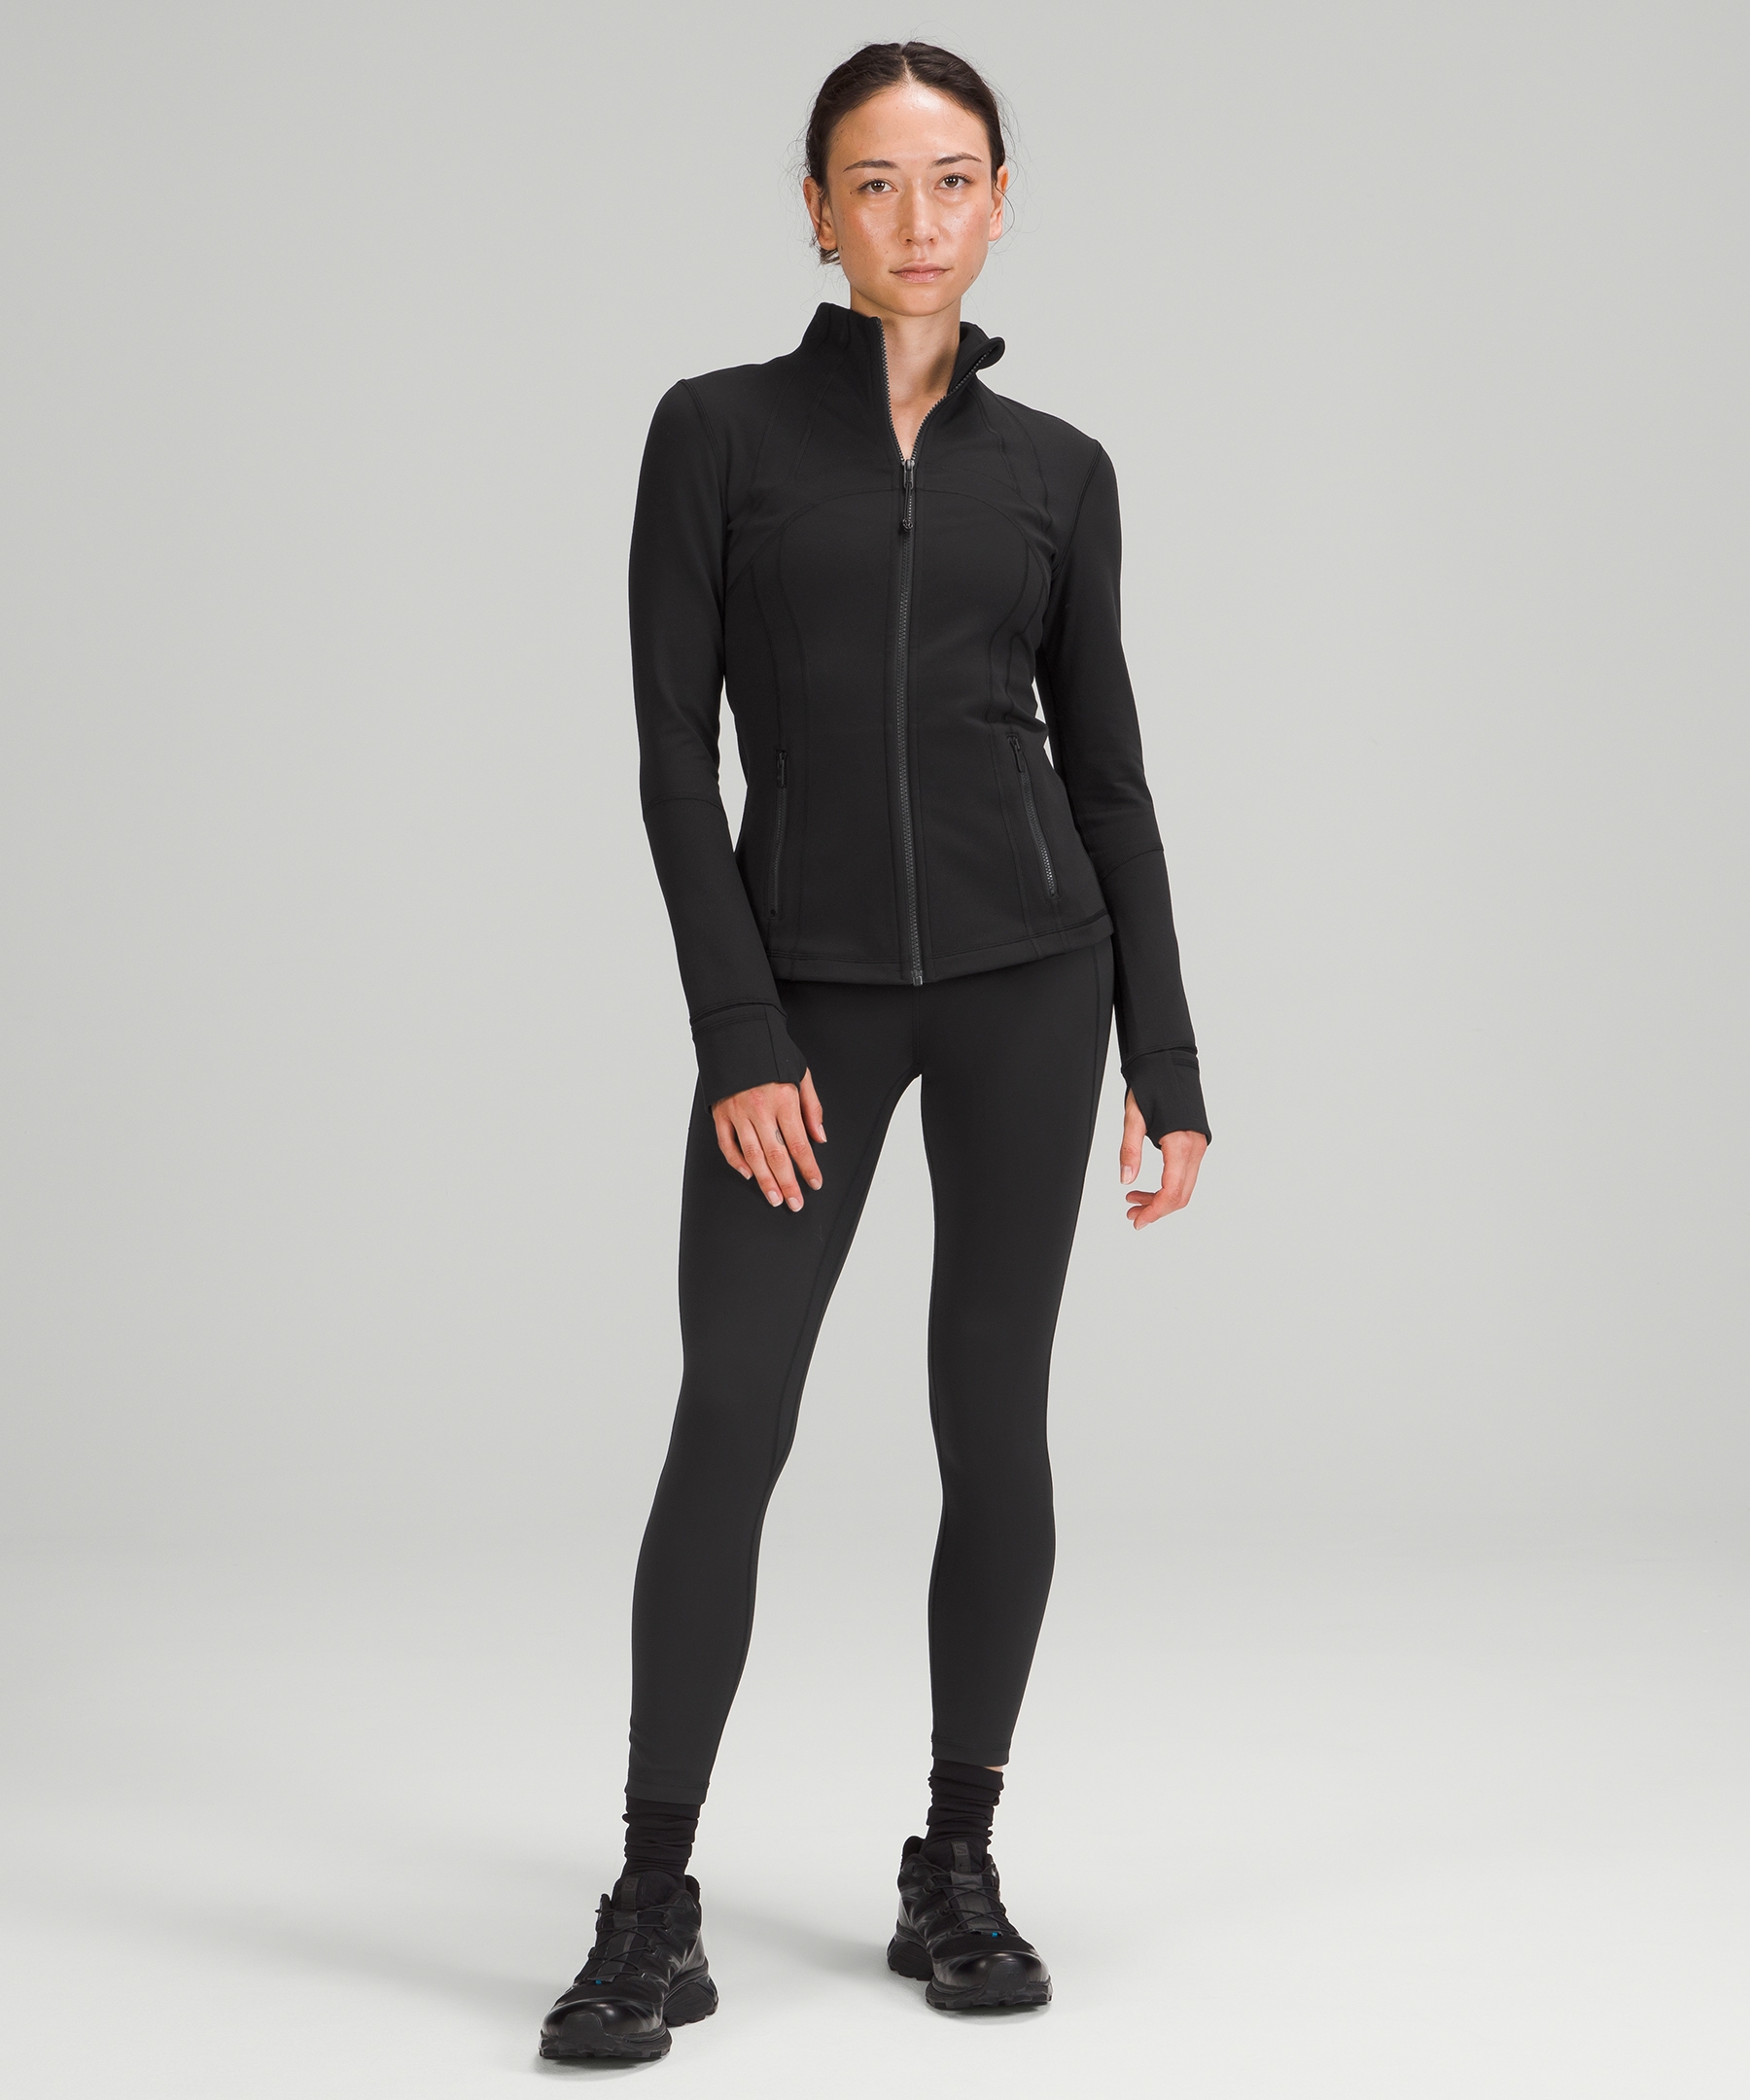 Why Lululemon shoppers call the Cross Chill Jacket 'absolutely perfect